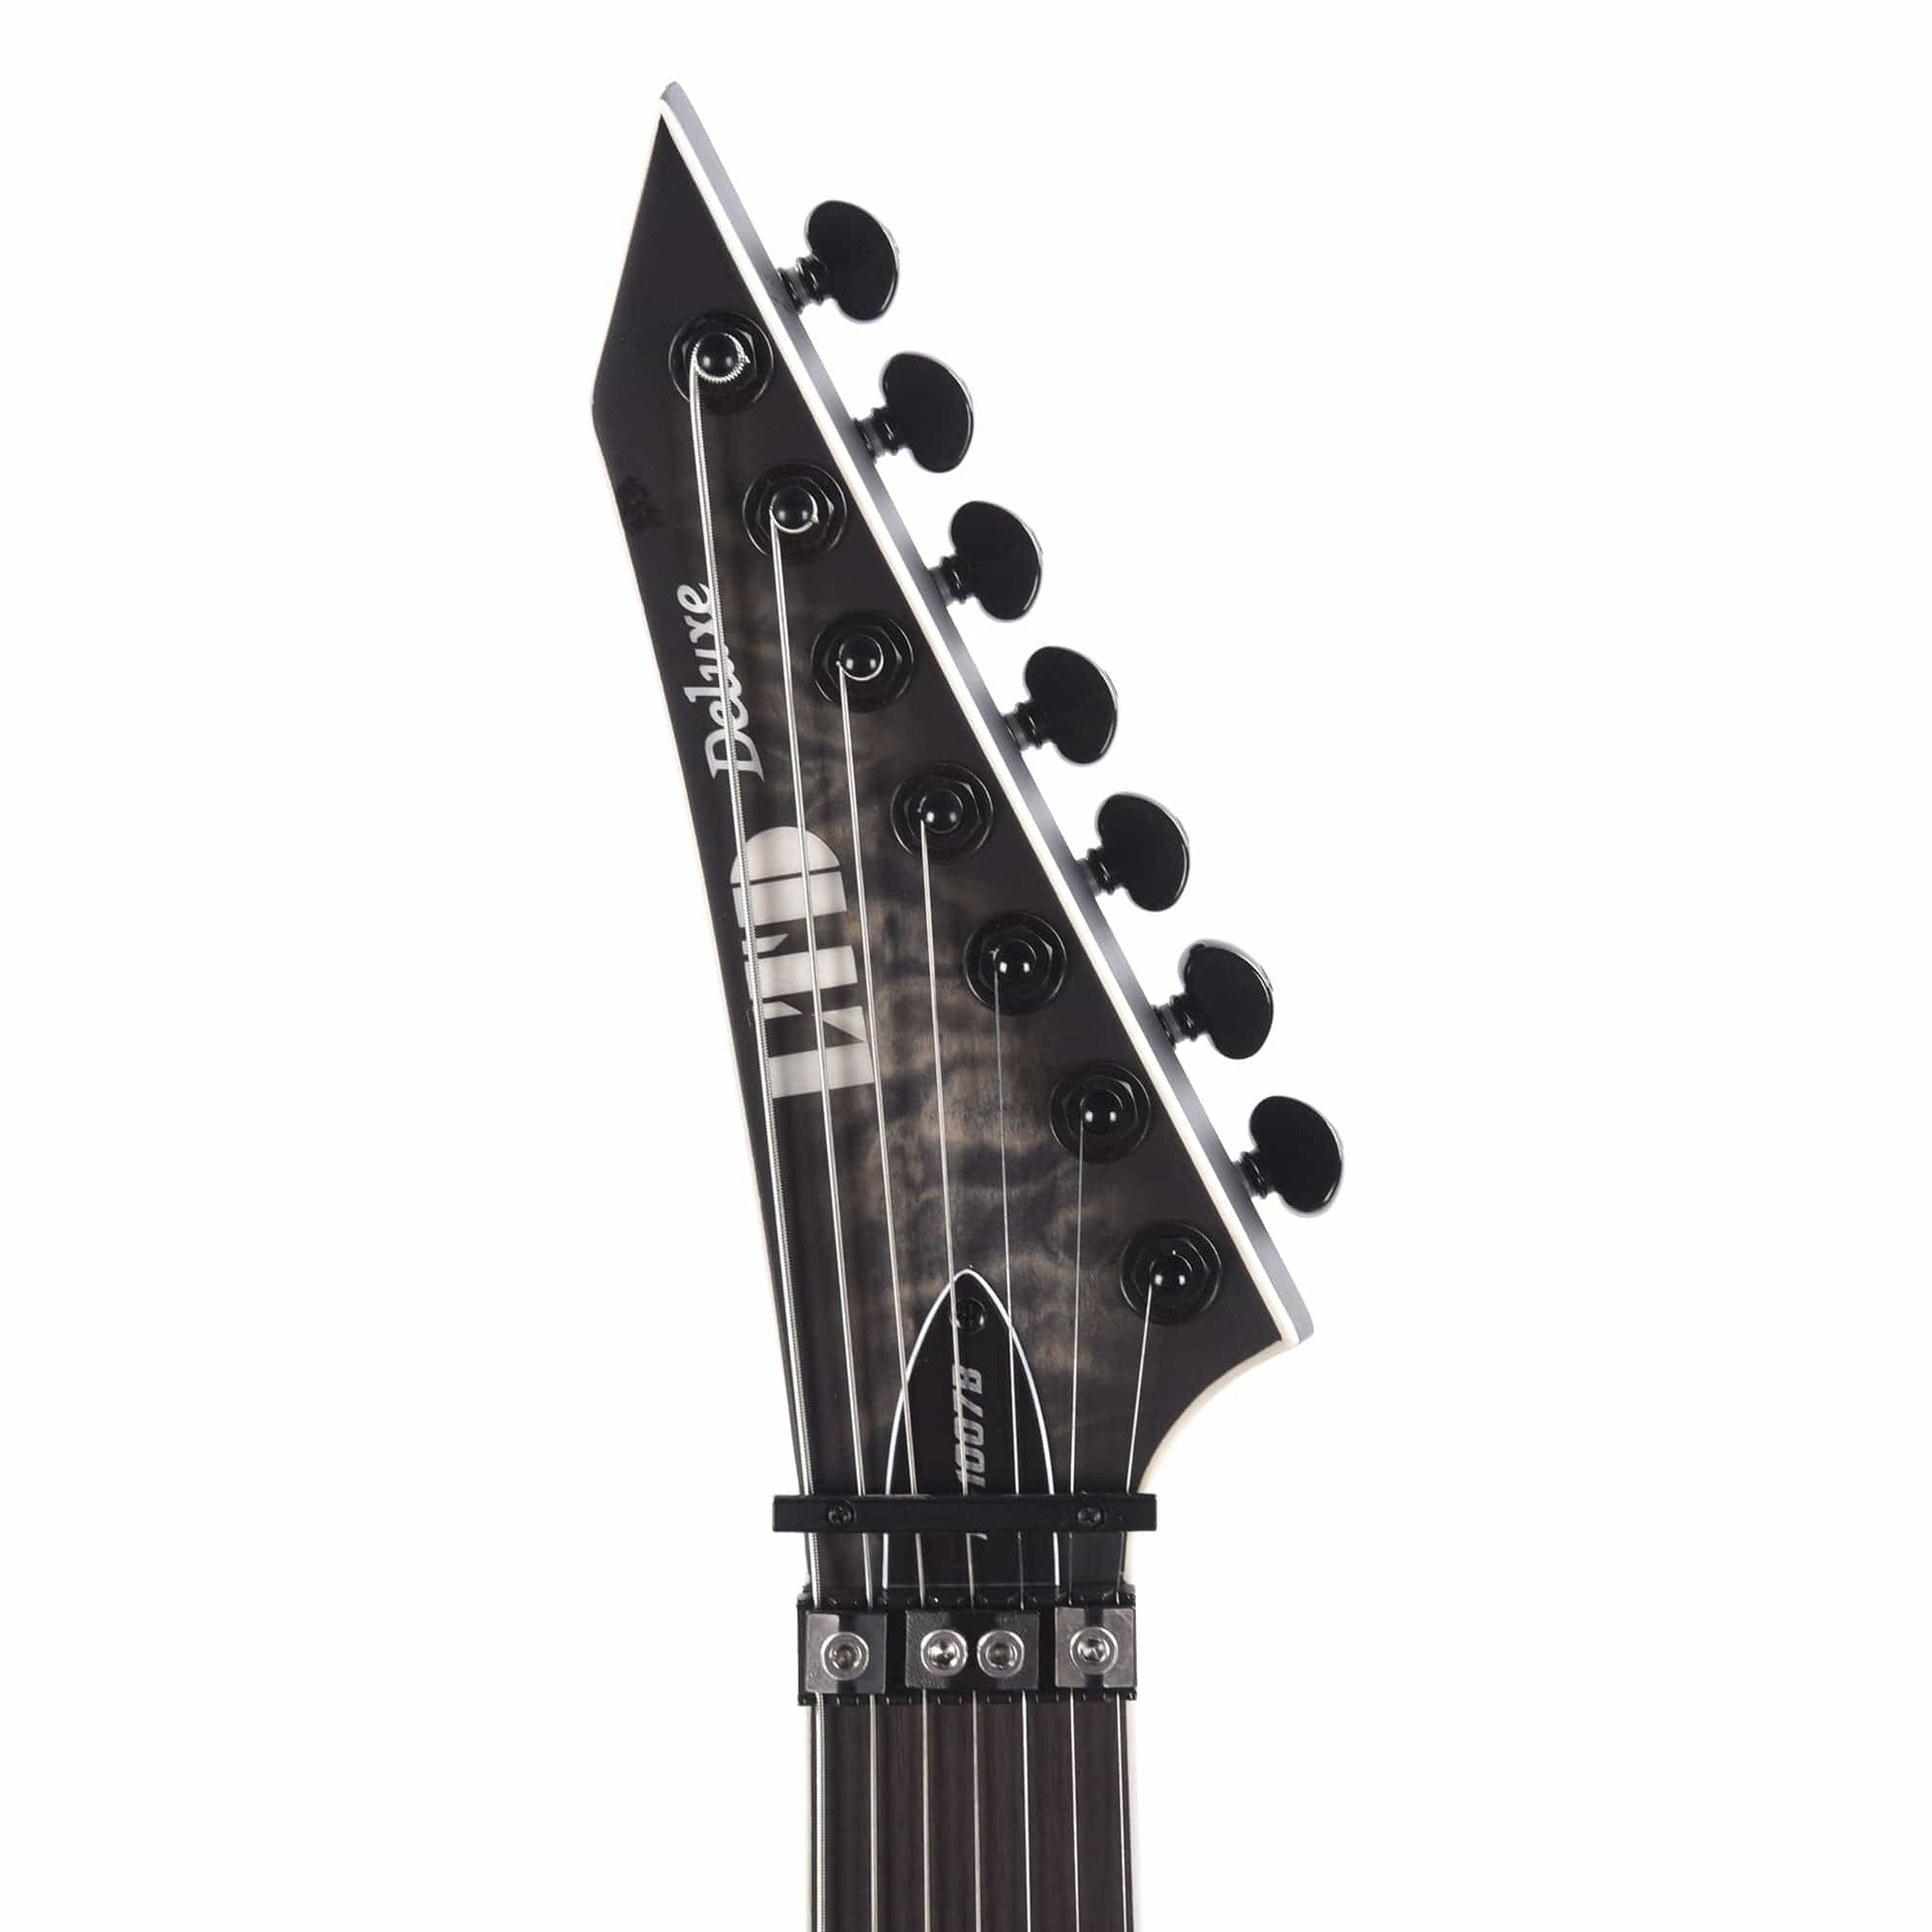 ESP LTD M-1007B Baritone Charcoal Burst Satin 7-String w/ Quilted Maple Top Electric Guitars / Solid Body